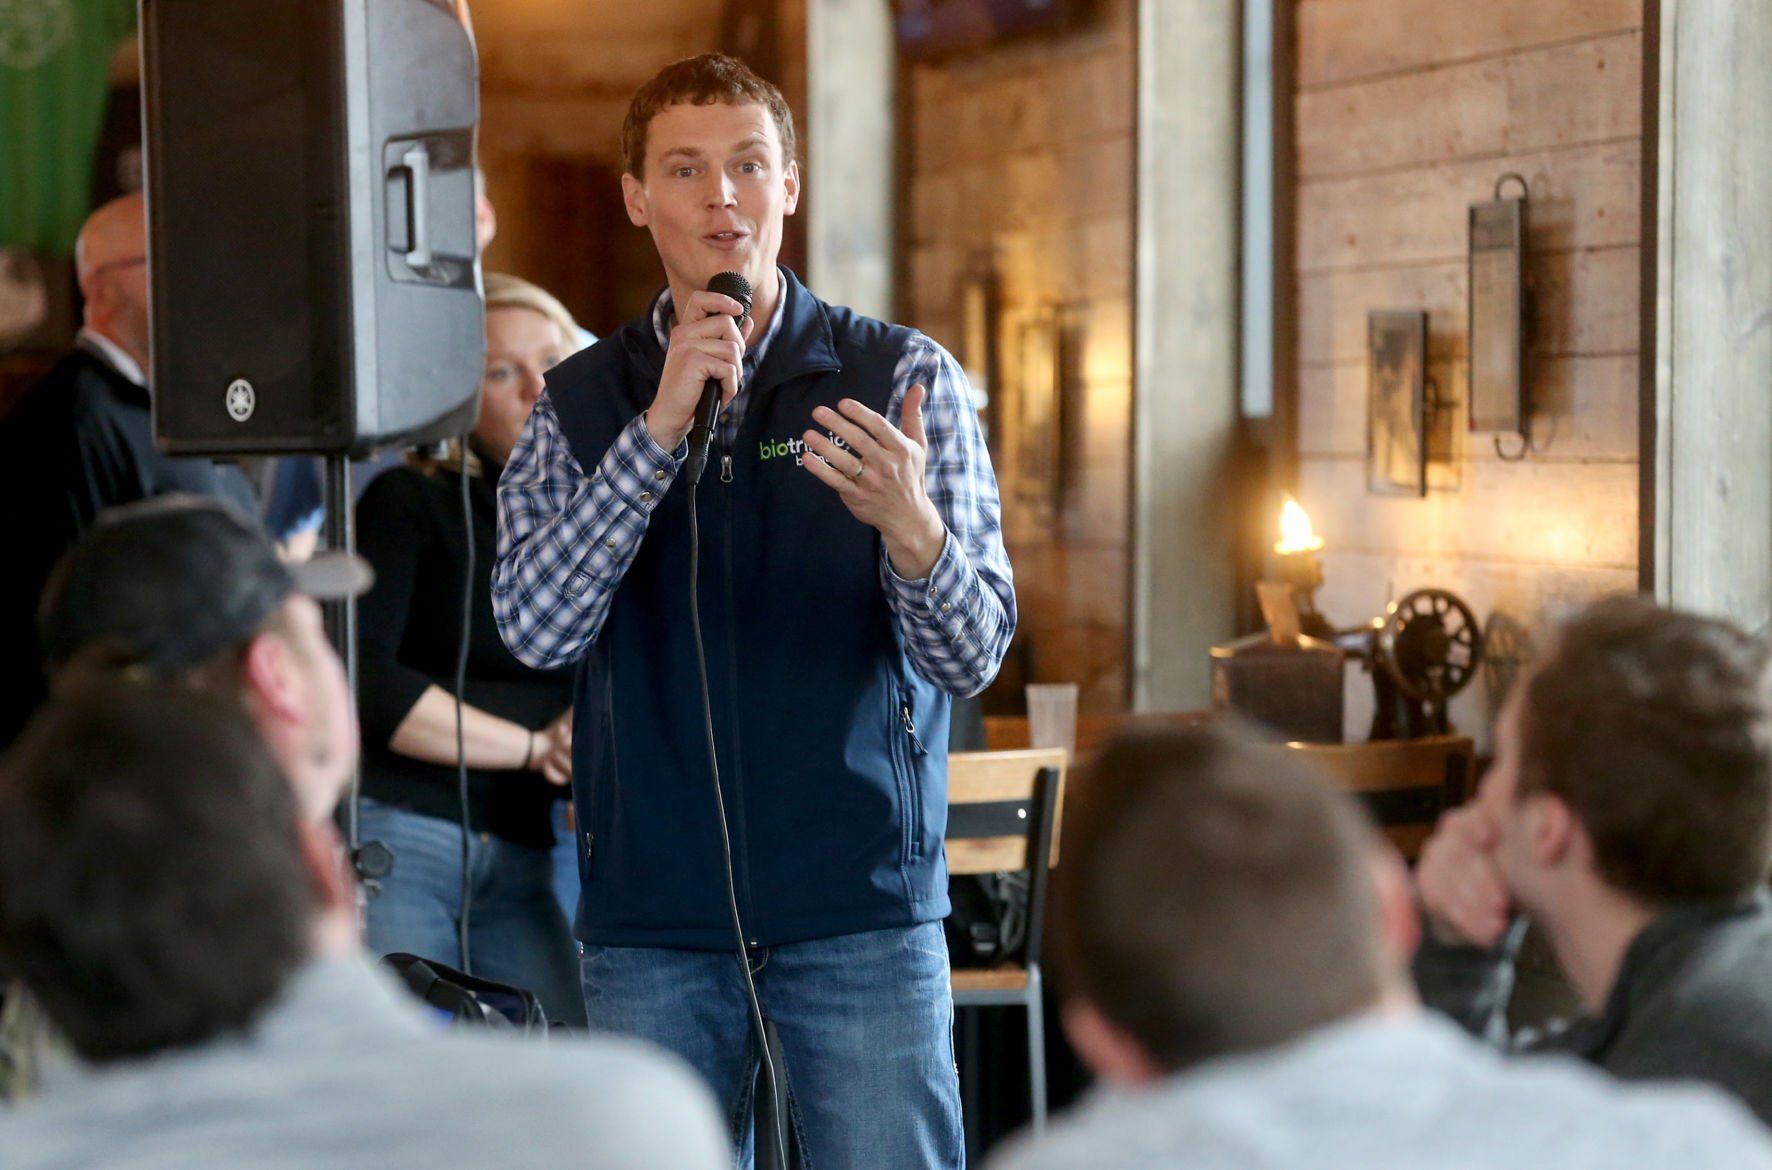 Evan Brehm, with Indigo Ag, gives a presentation during a Farm to Brew event at Textile Brewing Co. in Dyersville, Iowa, on Wednesday, March 30, 2022.    PHOTO CREDIT: JESSICA REILLY